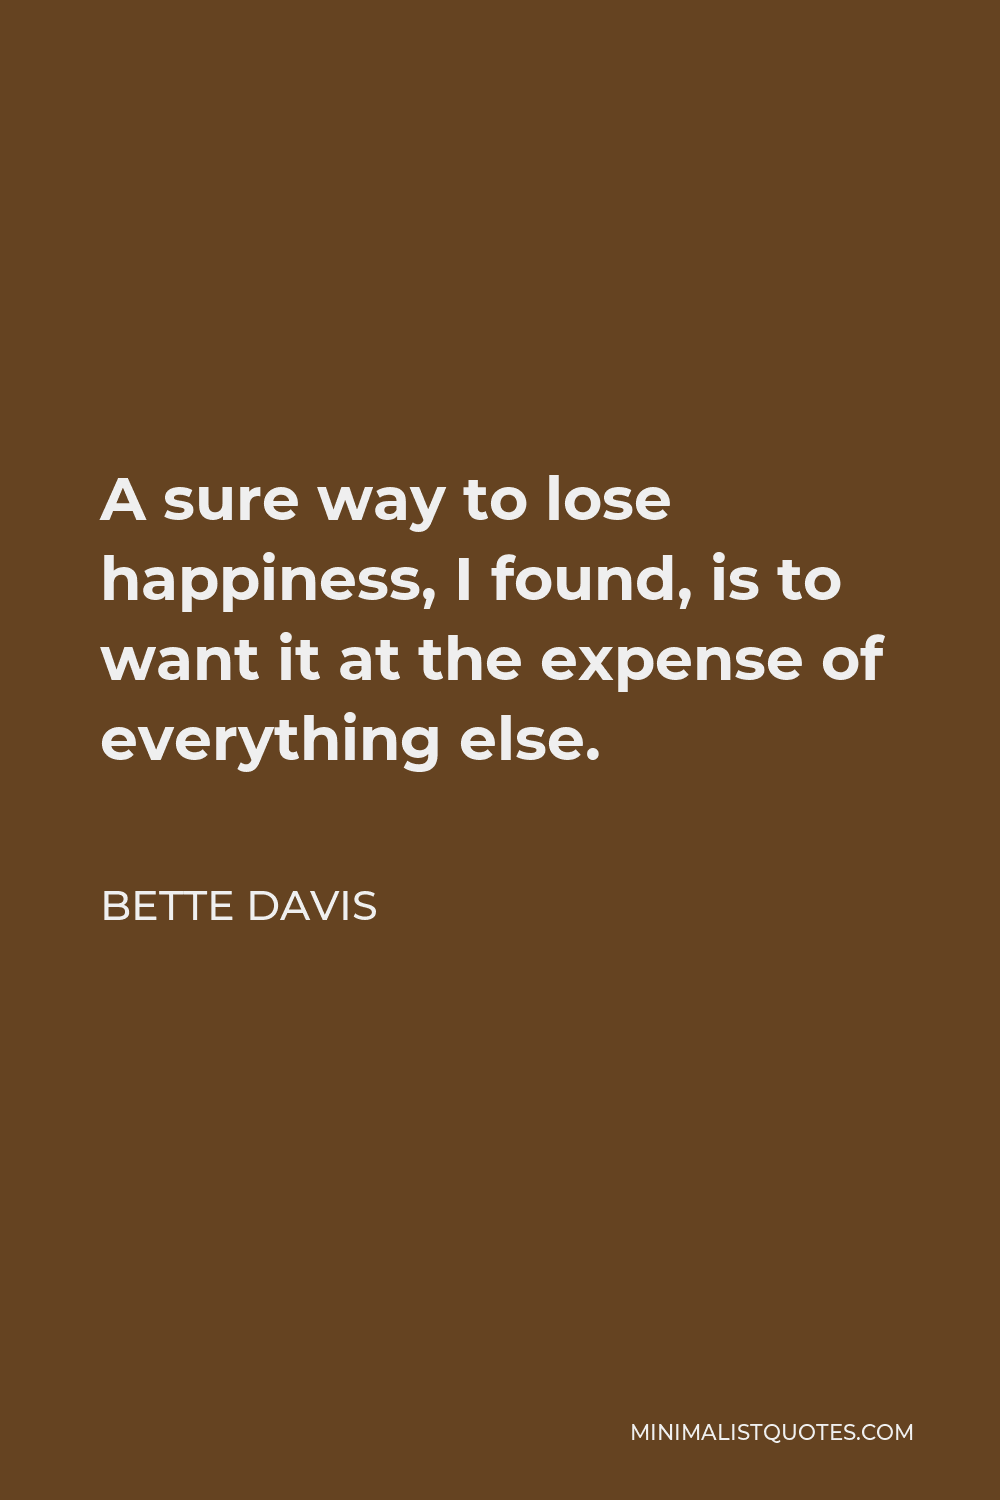 Bette Davis Quote - A sure way to lose happiness, I found, is to want it at the expense of everything else.